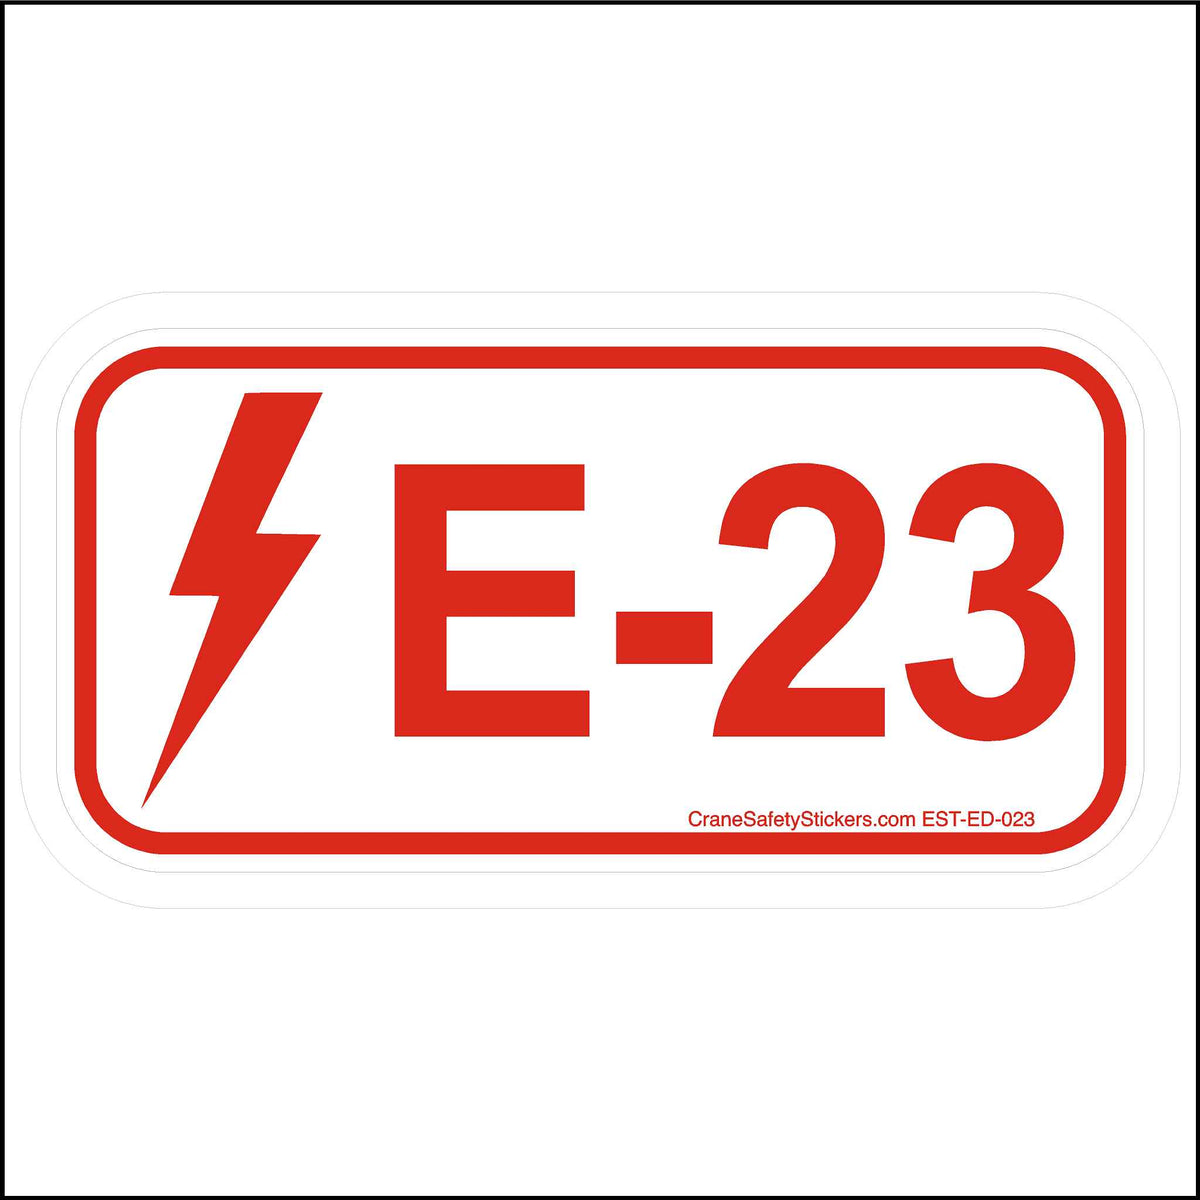 Energy Control Program Electrical Disconnect Stickers E-23.